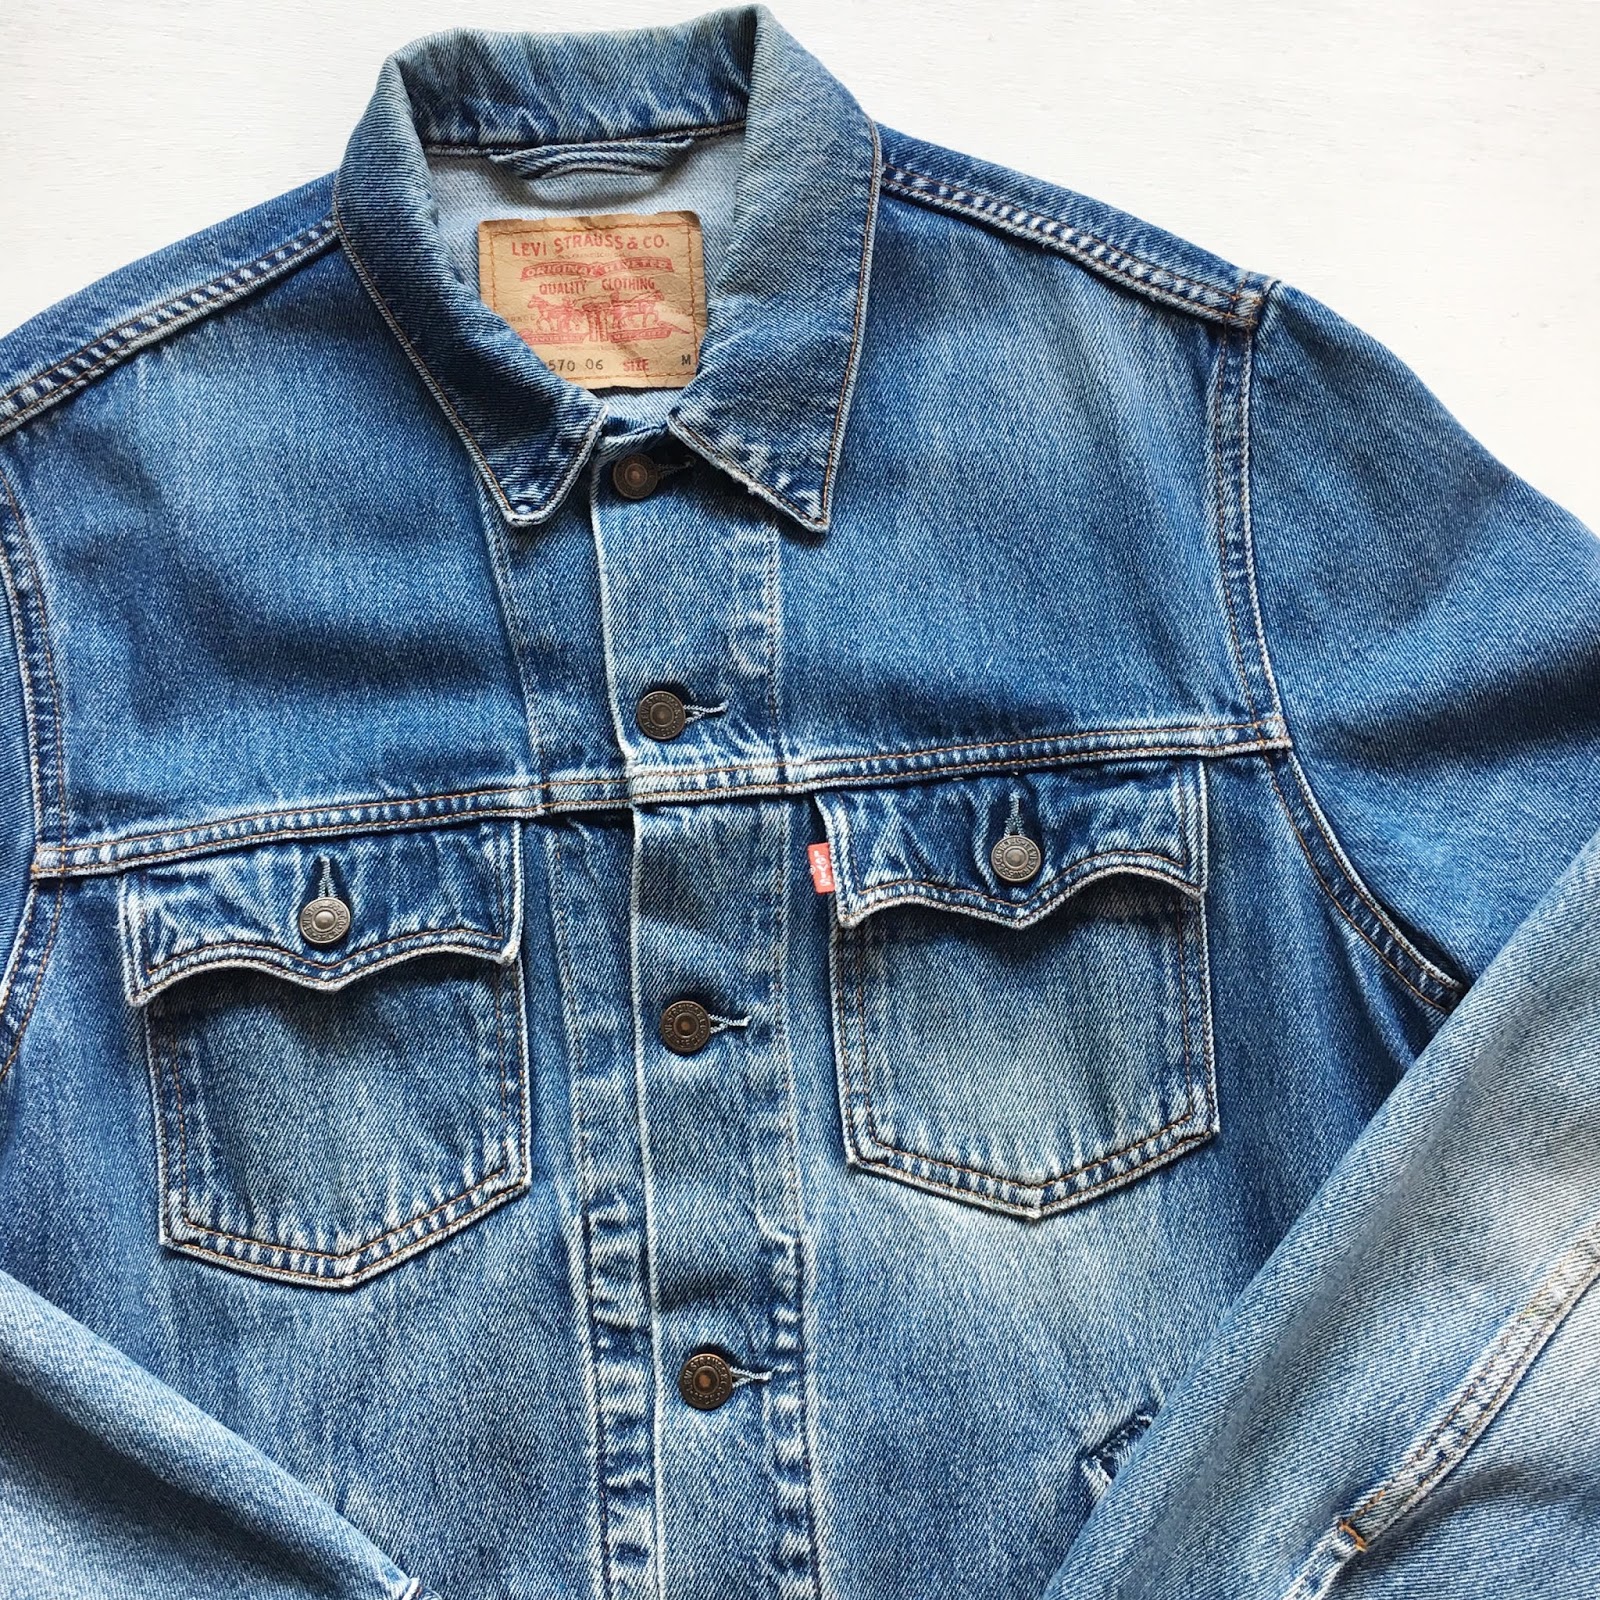 Bluezz&cheeK Used Clothing And Antique store: 1990s Euro Levi's 